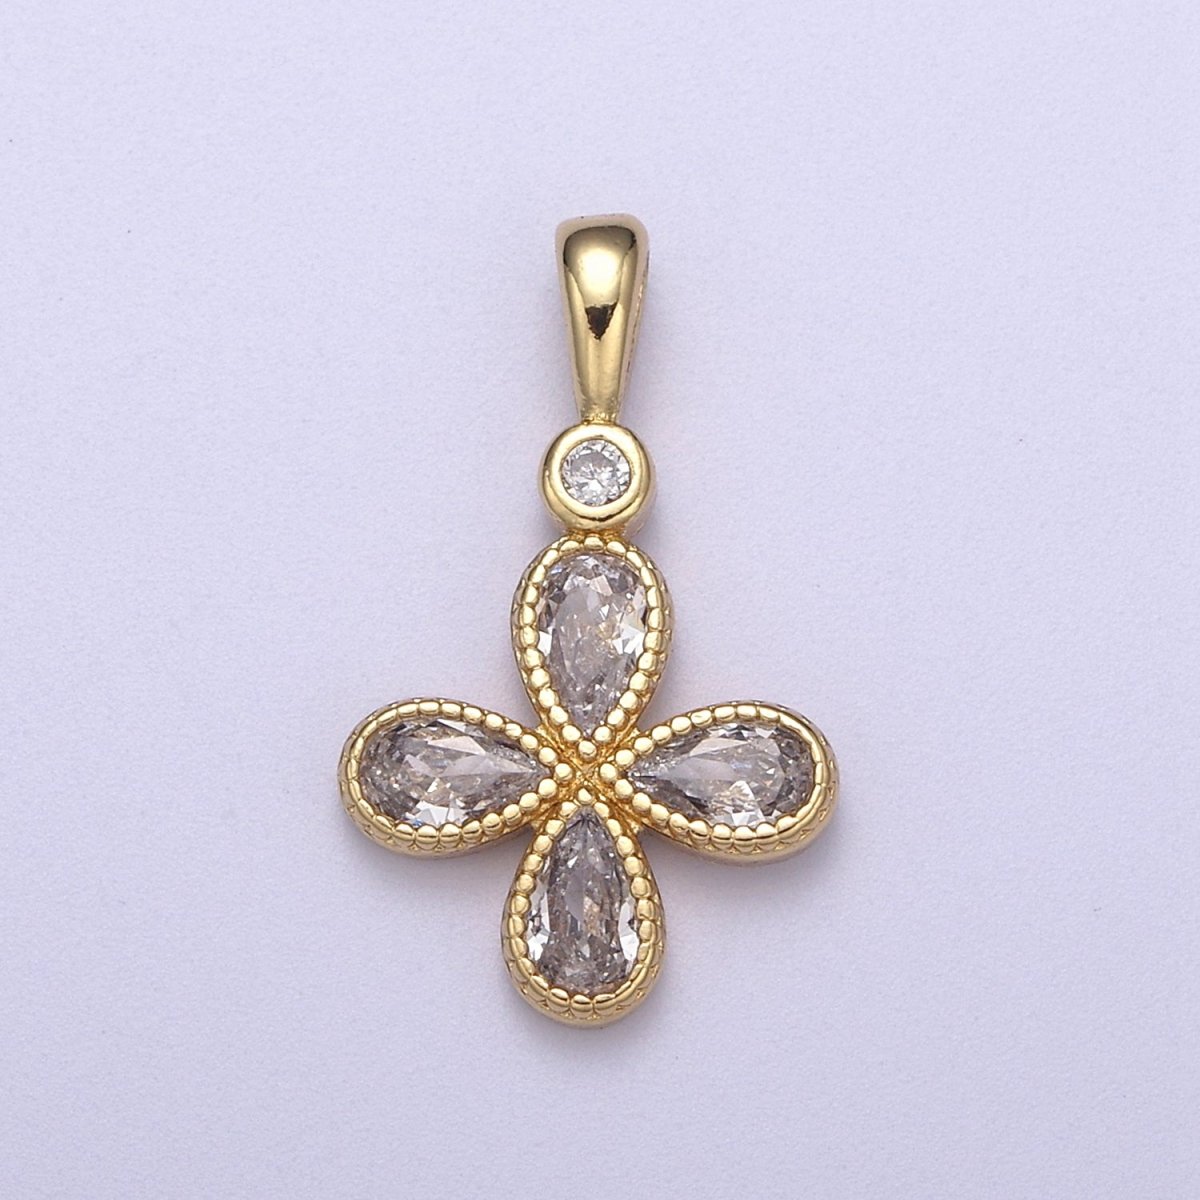 Four Leaf Clover Gold Filled lucky charm pendant necklace good luck charm H-131 H-135 - DLUXCA